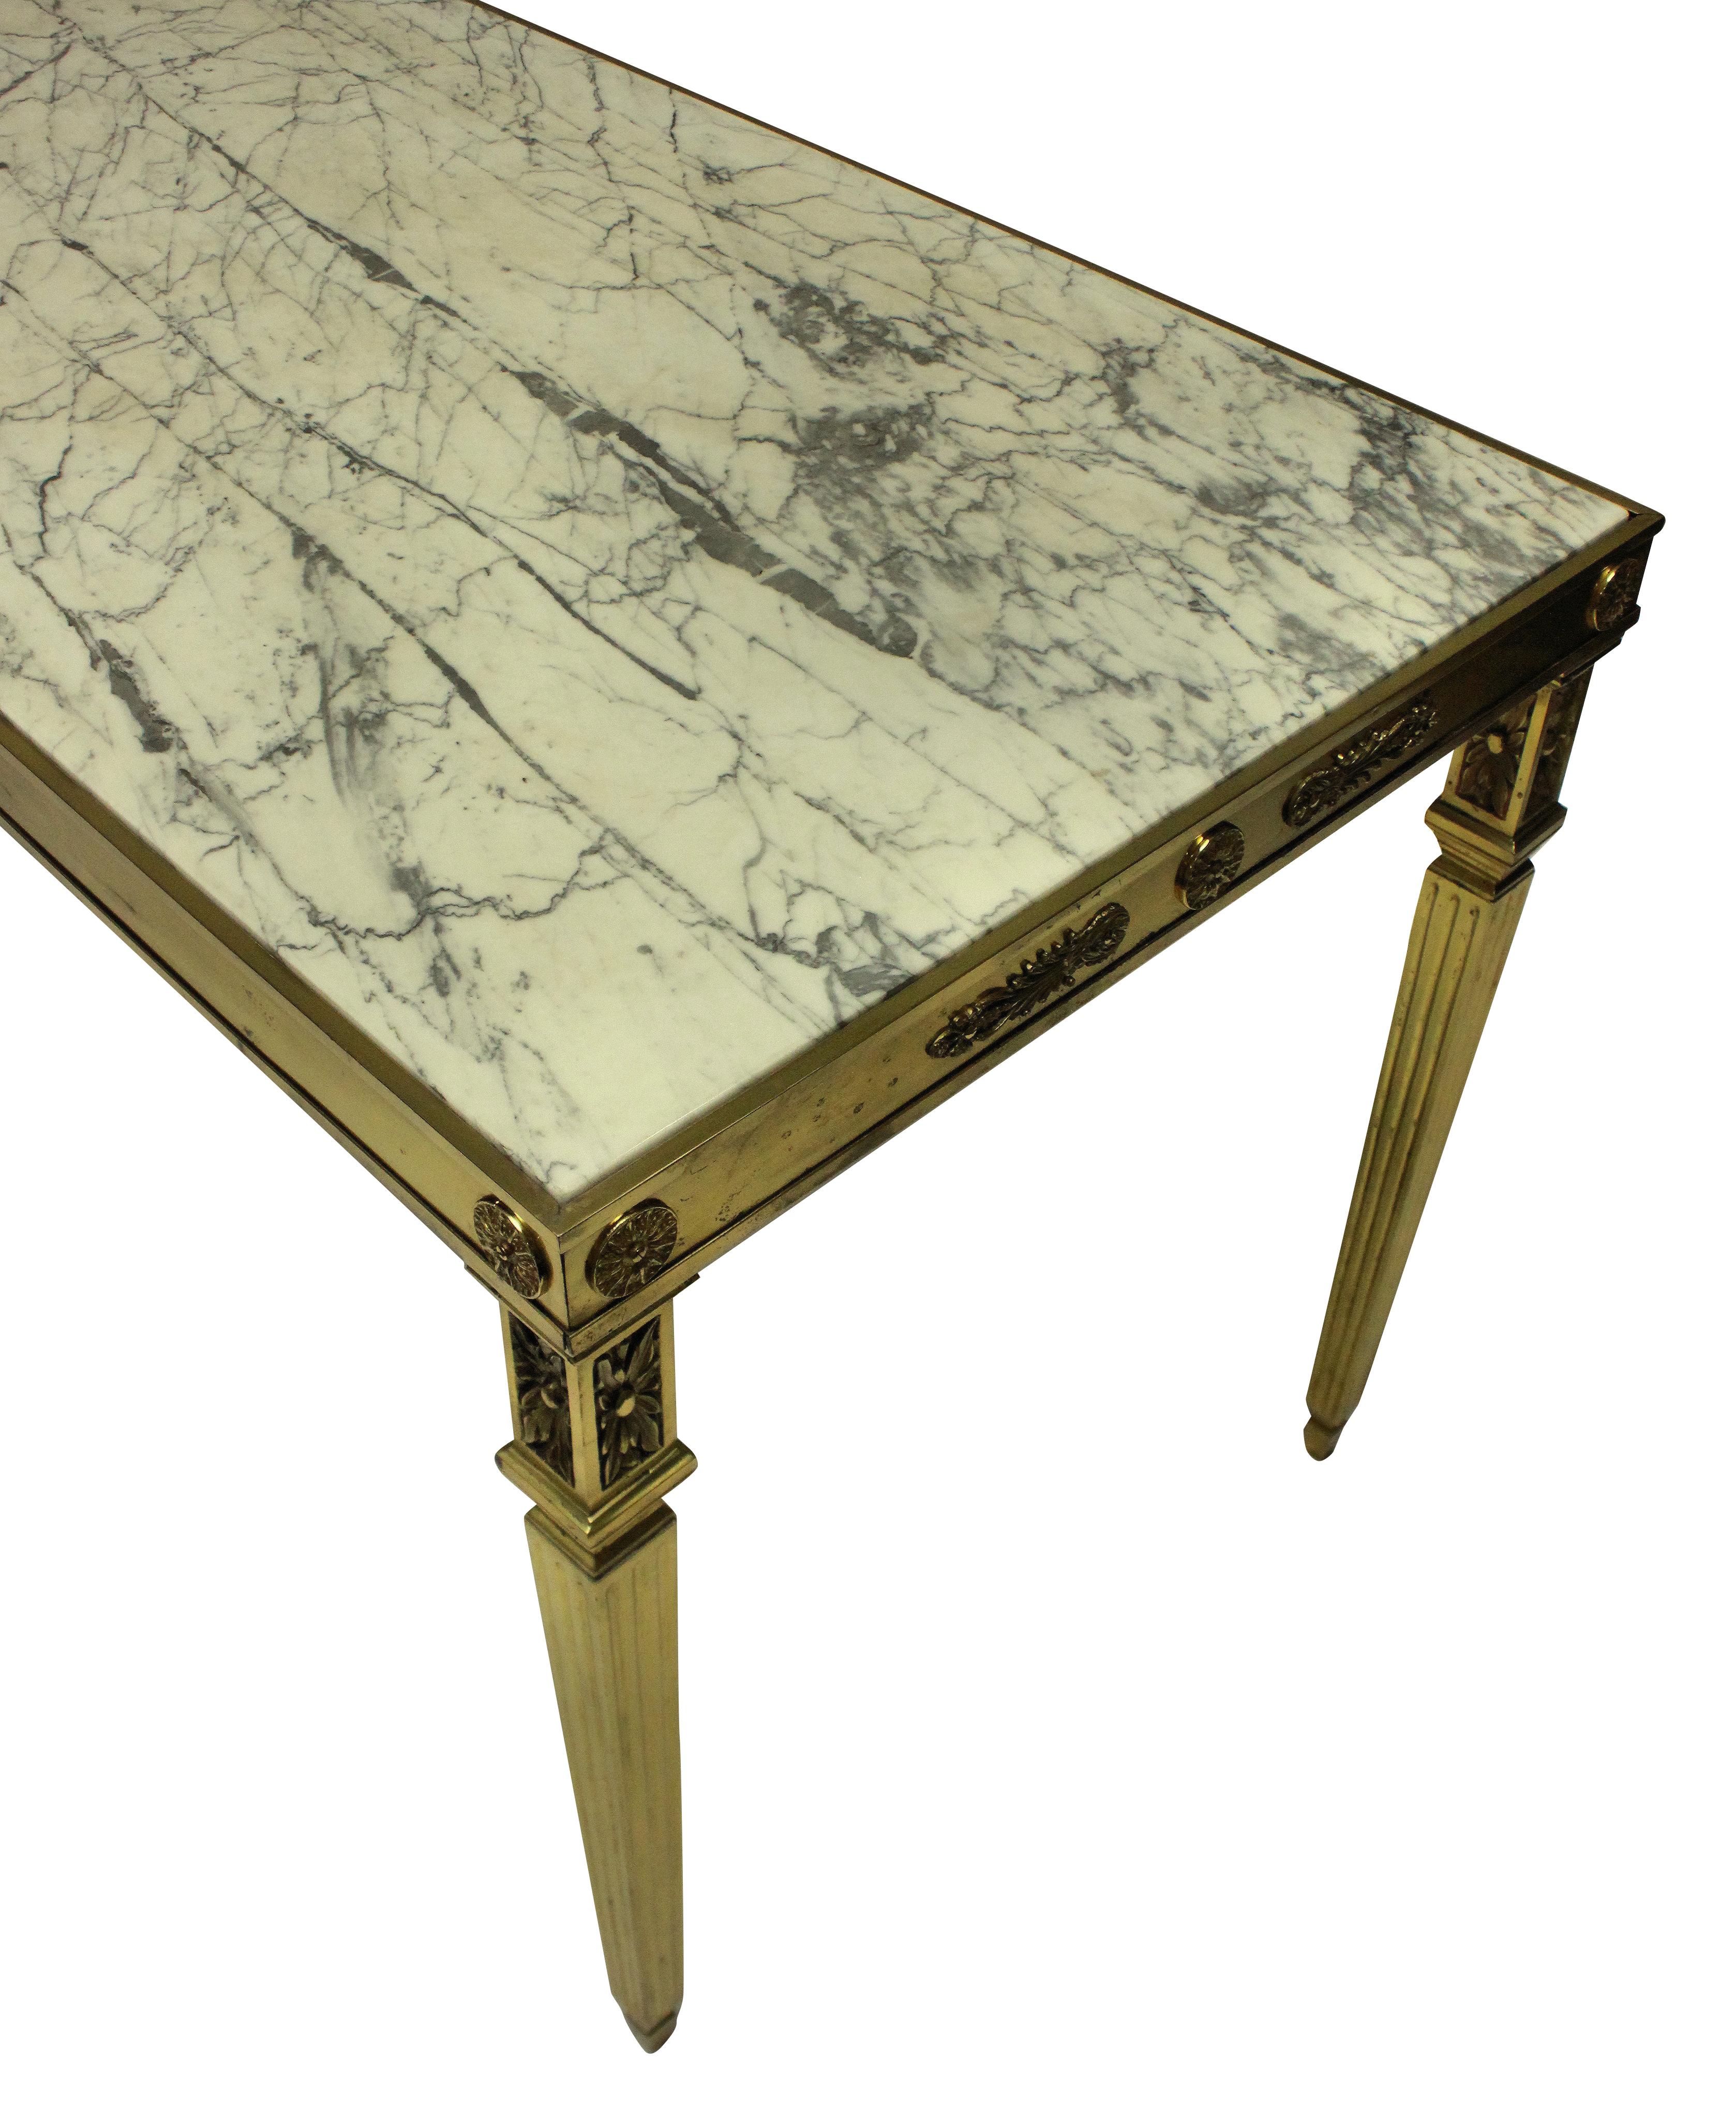 A fine Italian gilt bronze neoclassical hall table, with acanthus decoration around each frieze and on square tapering fluted legs. With an inset grey and off white marble top.